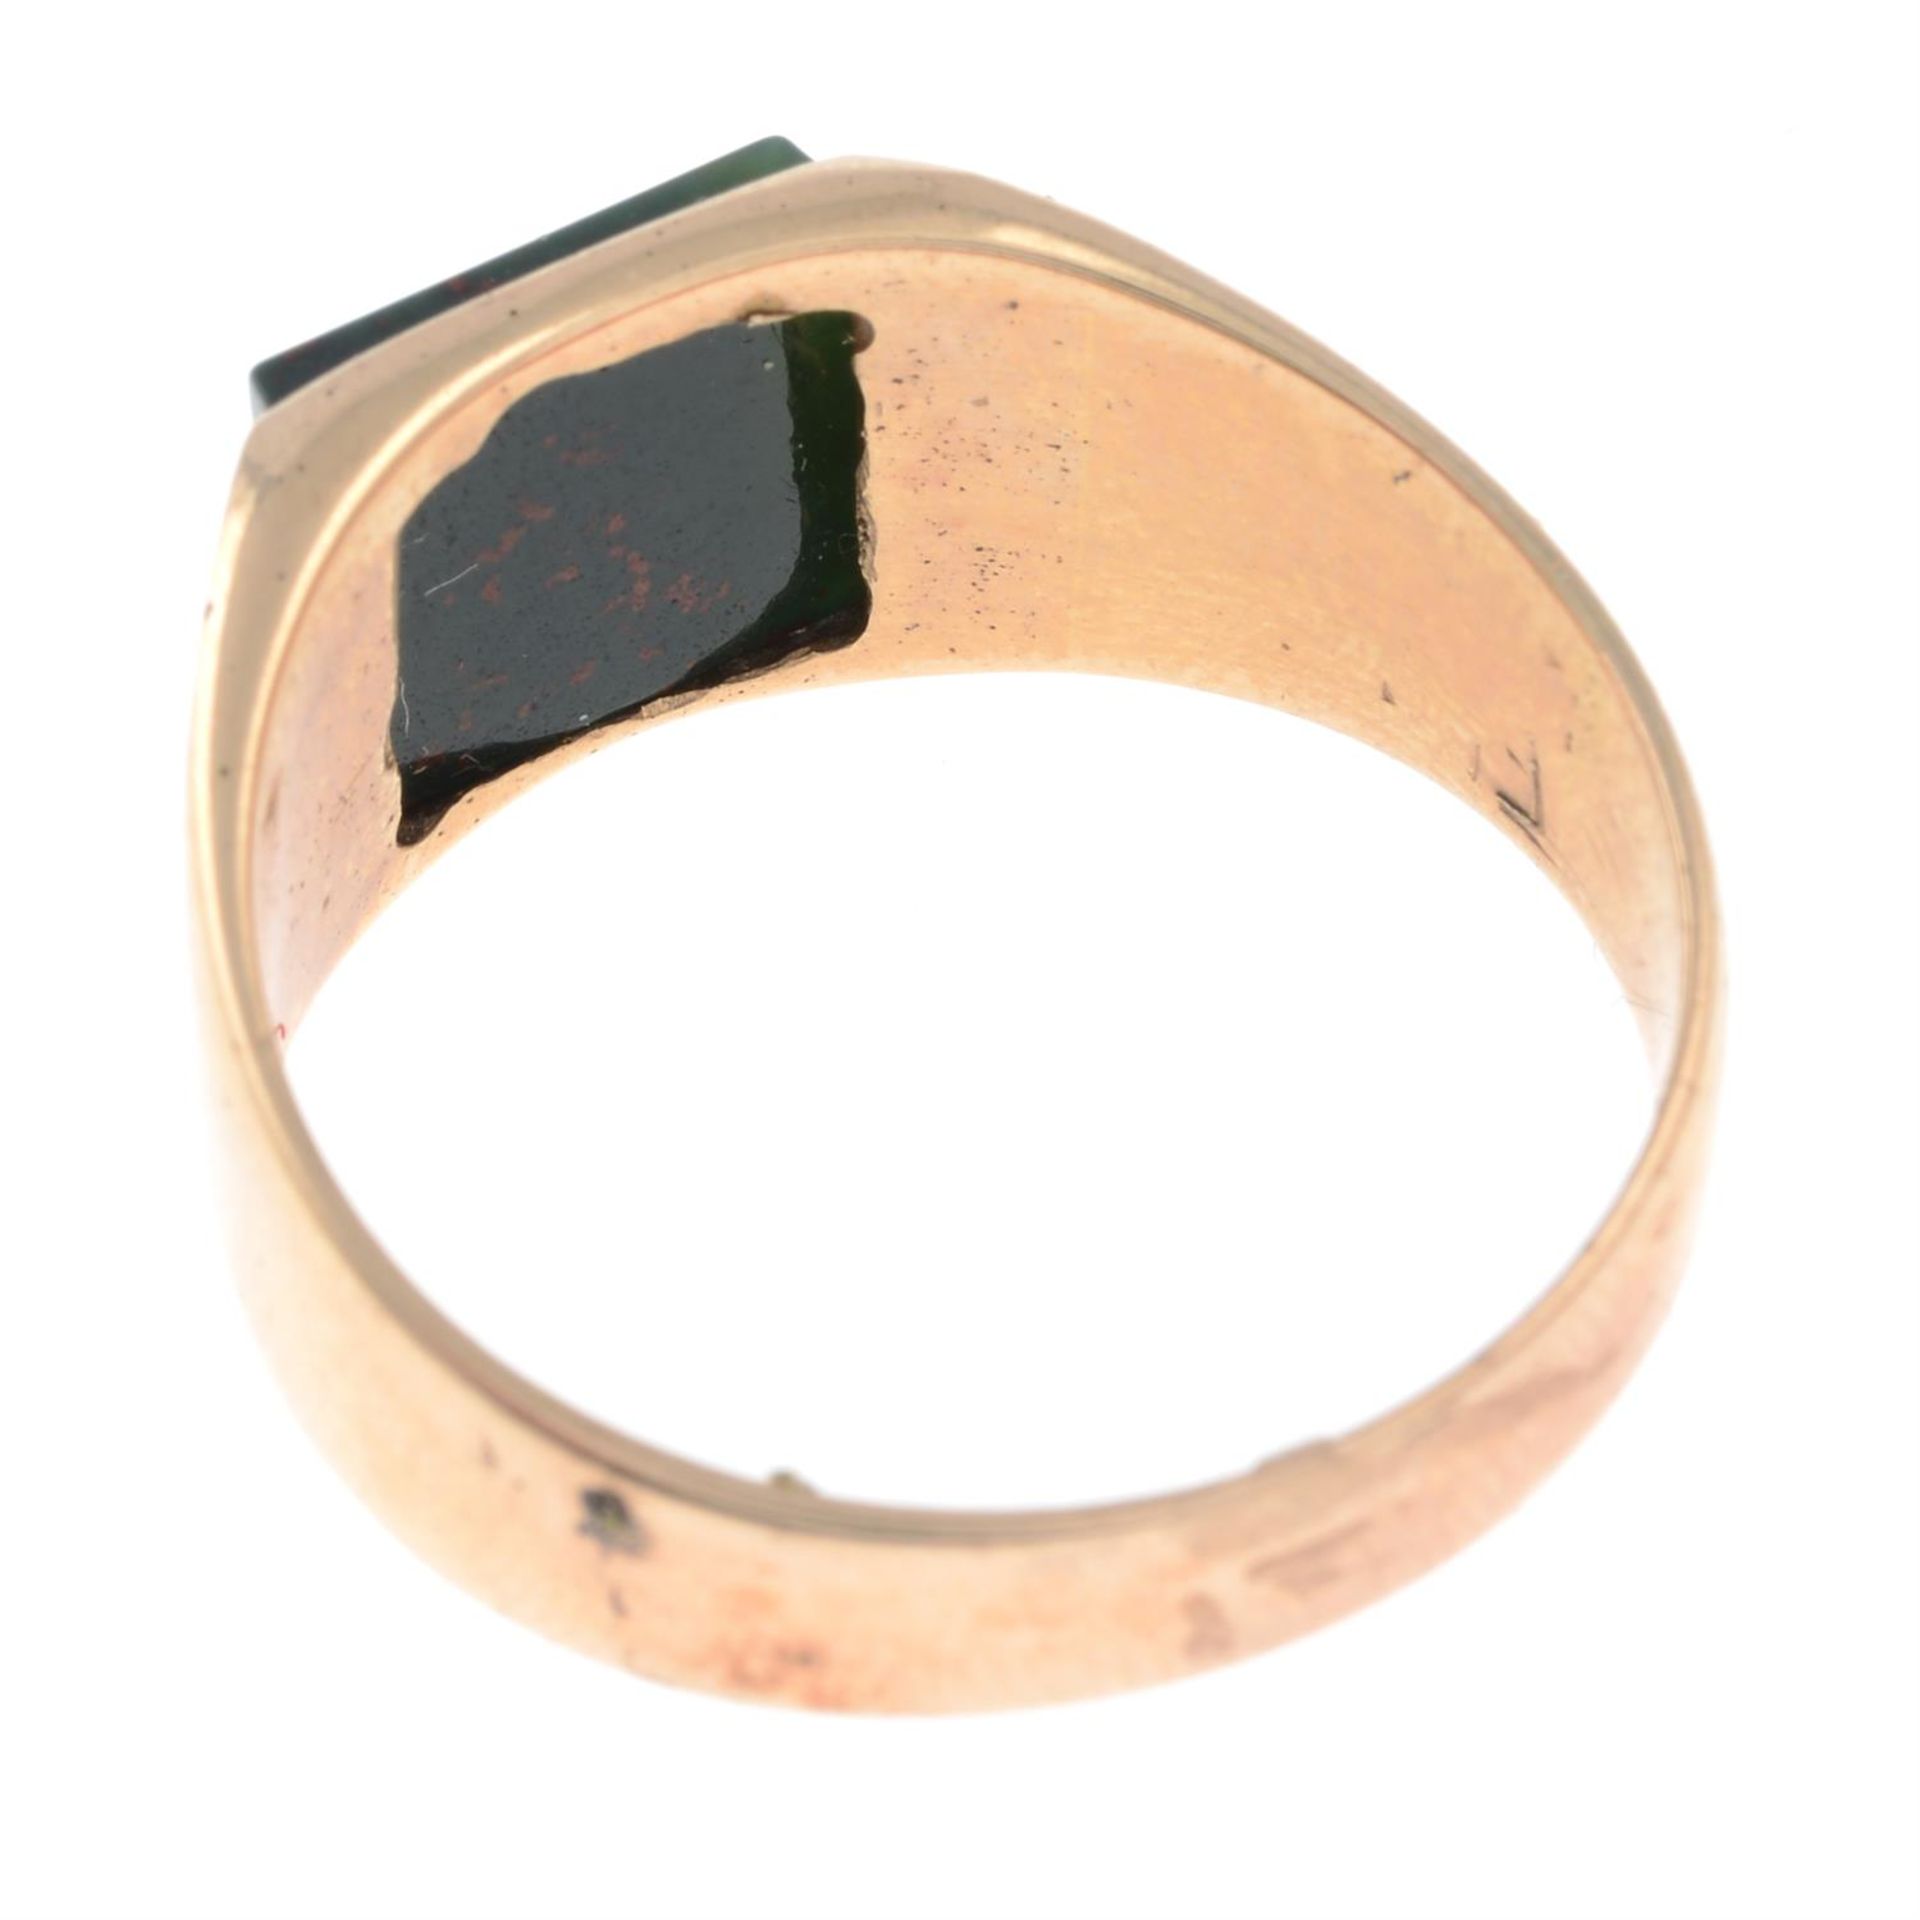 An early to mid 20th century 15ct gold bloodstone signet ring. - Image 2 of 2